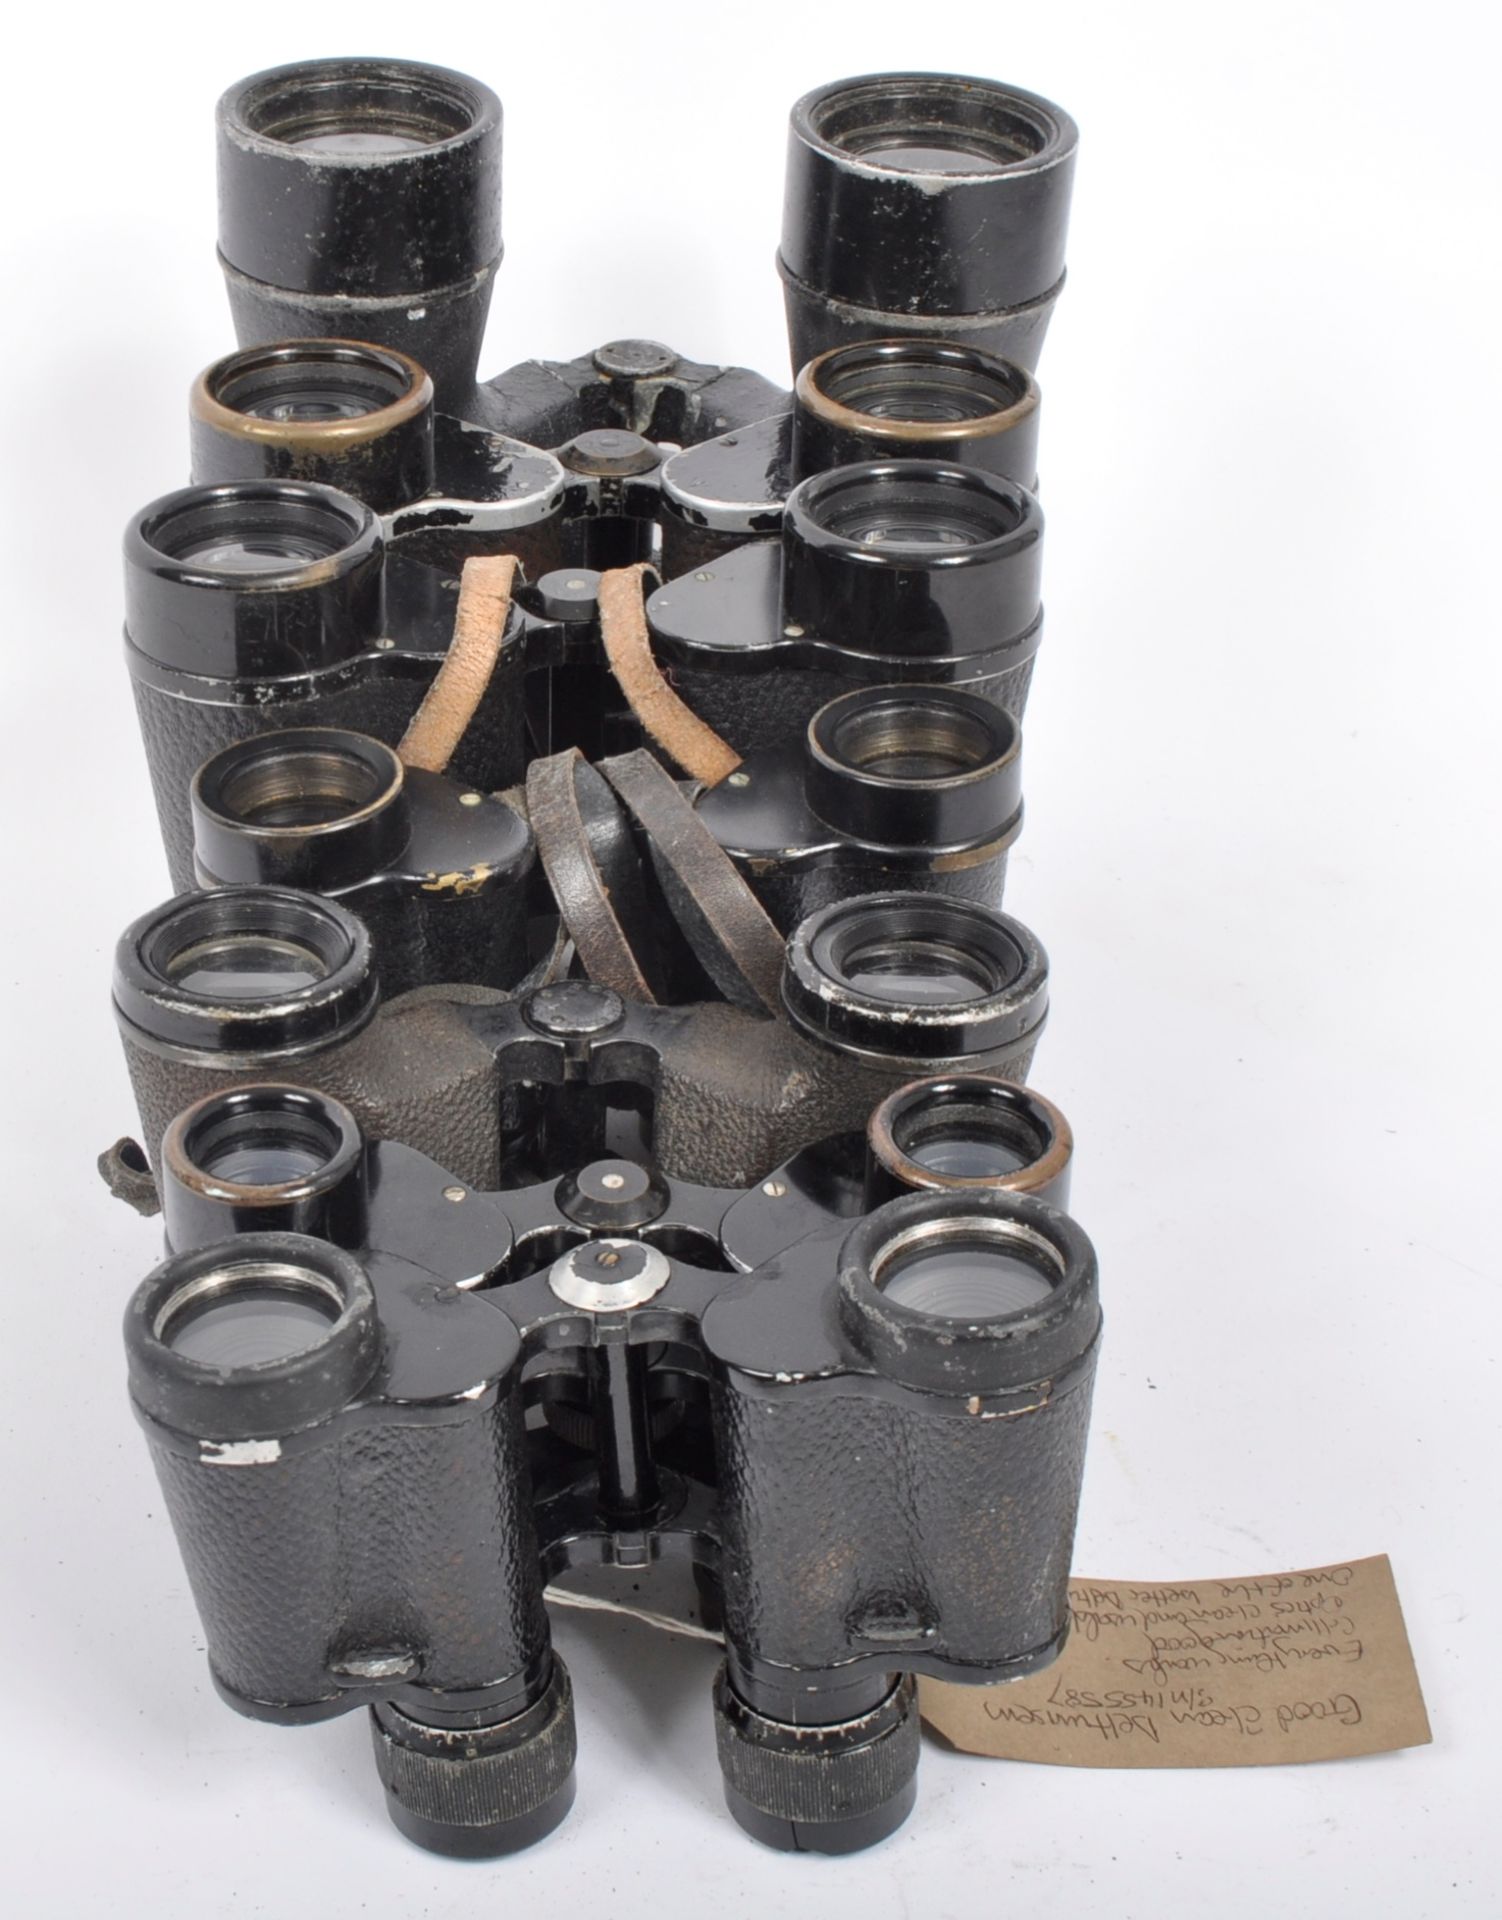 MIXED COLLECTION OF VINTAGE BINOCULARS - Image 5 of 5